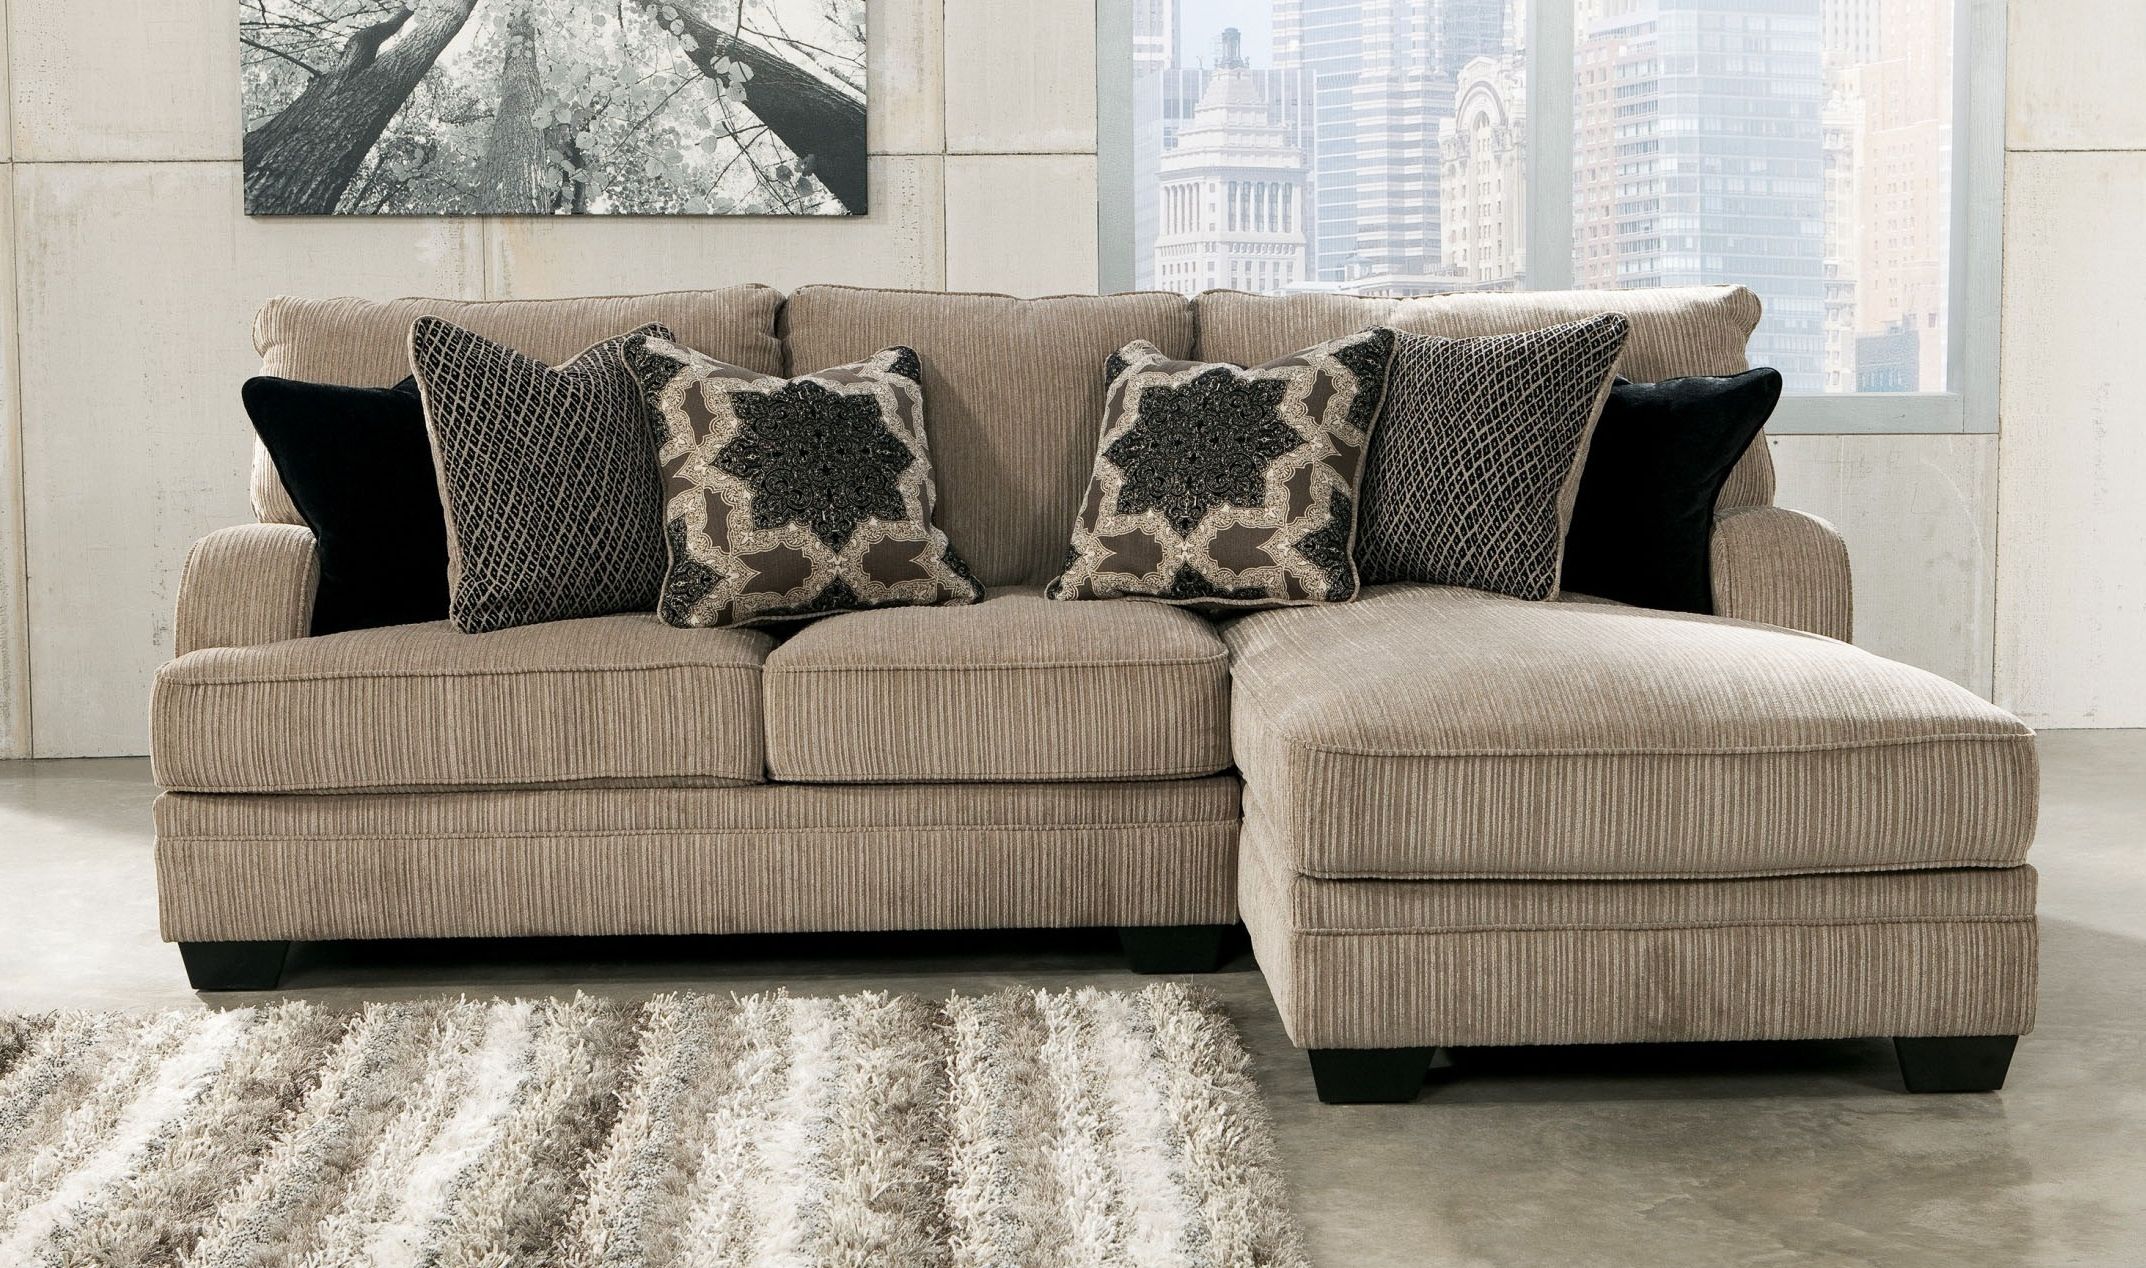 Best Sectional Sofa For Small Living Room